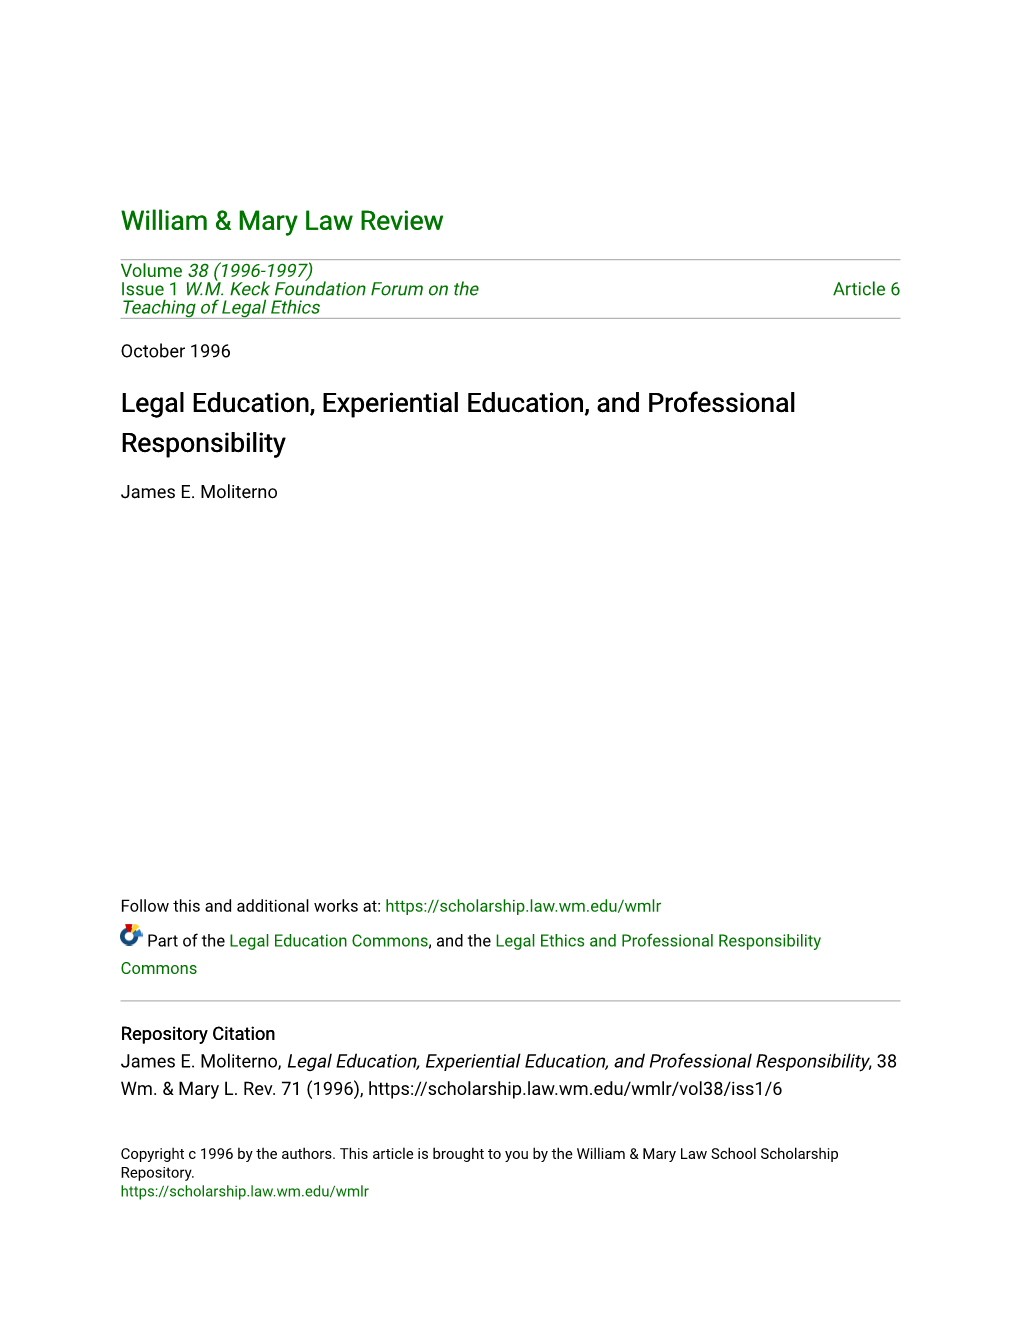 Legal Education, Experiential Education, and Professional Responsibility